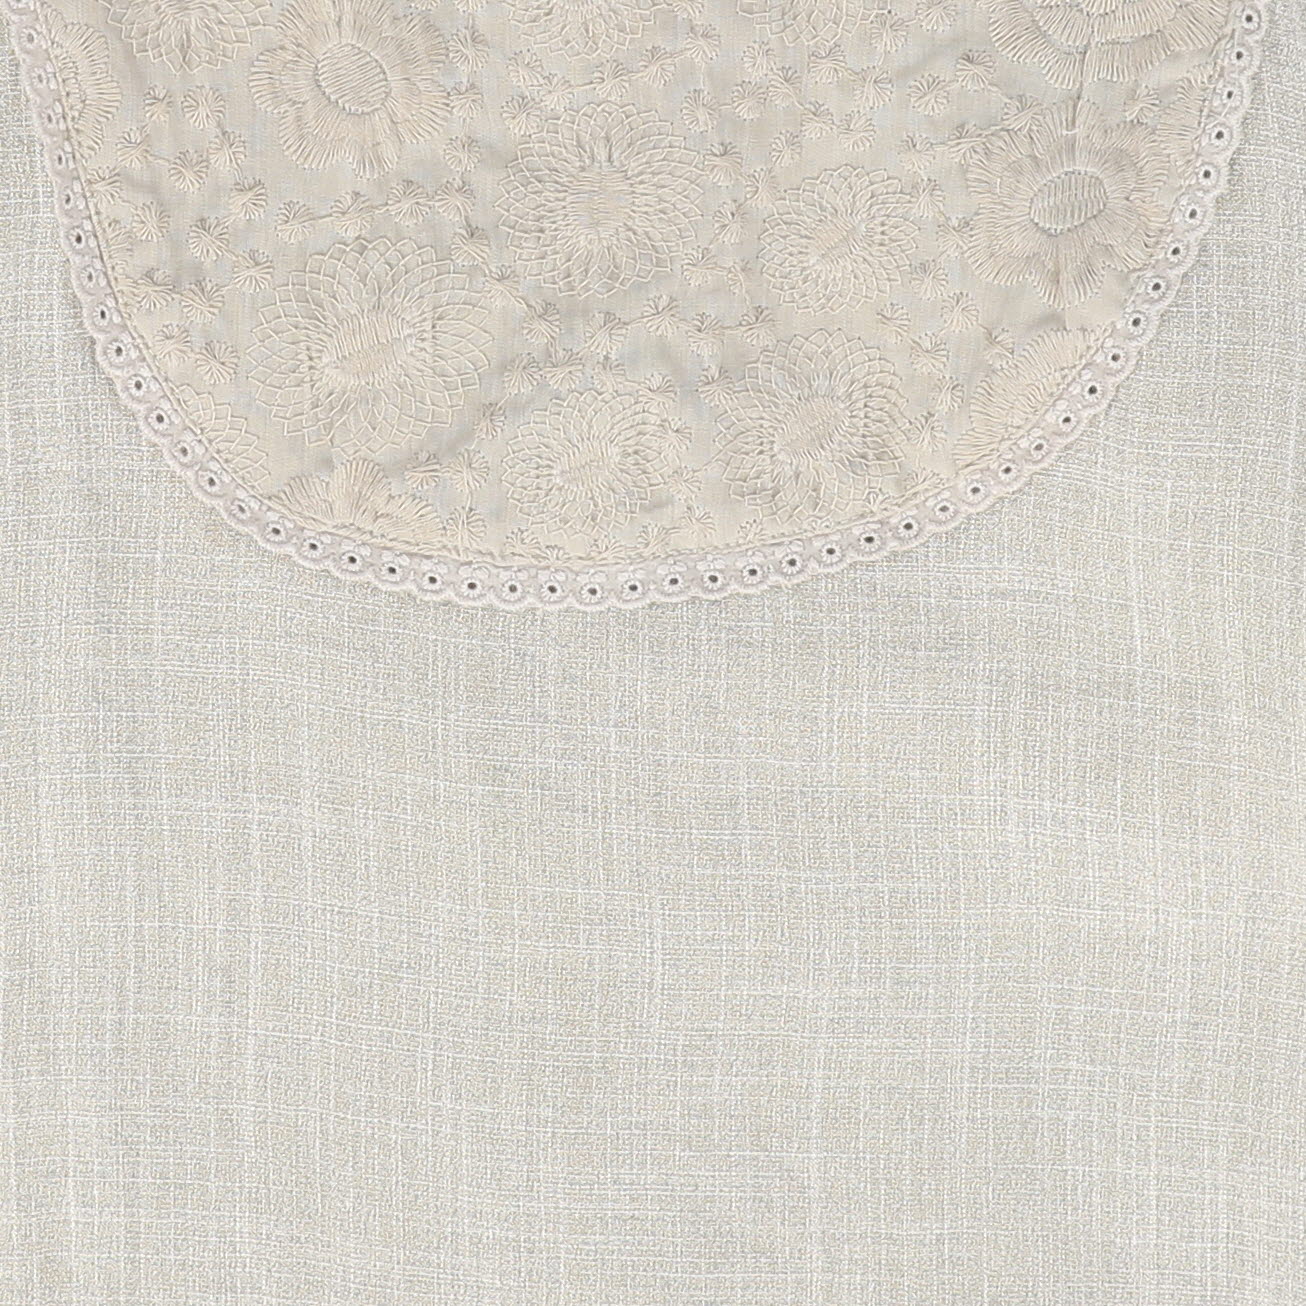 BAMBOO OATMEAL EMBROIDERED LINEN TOP [FINAL SALE]